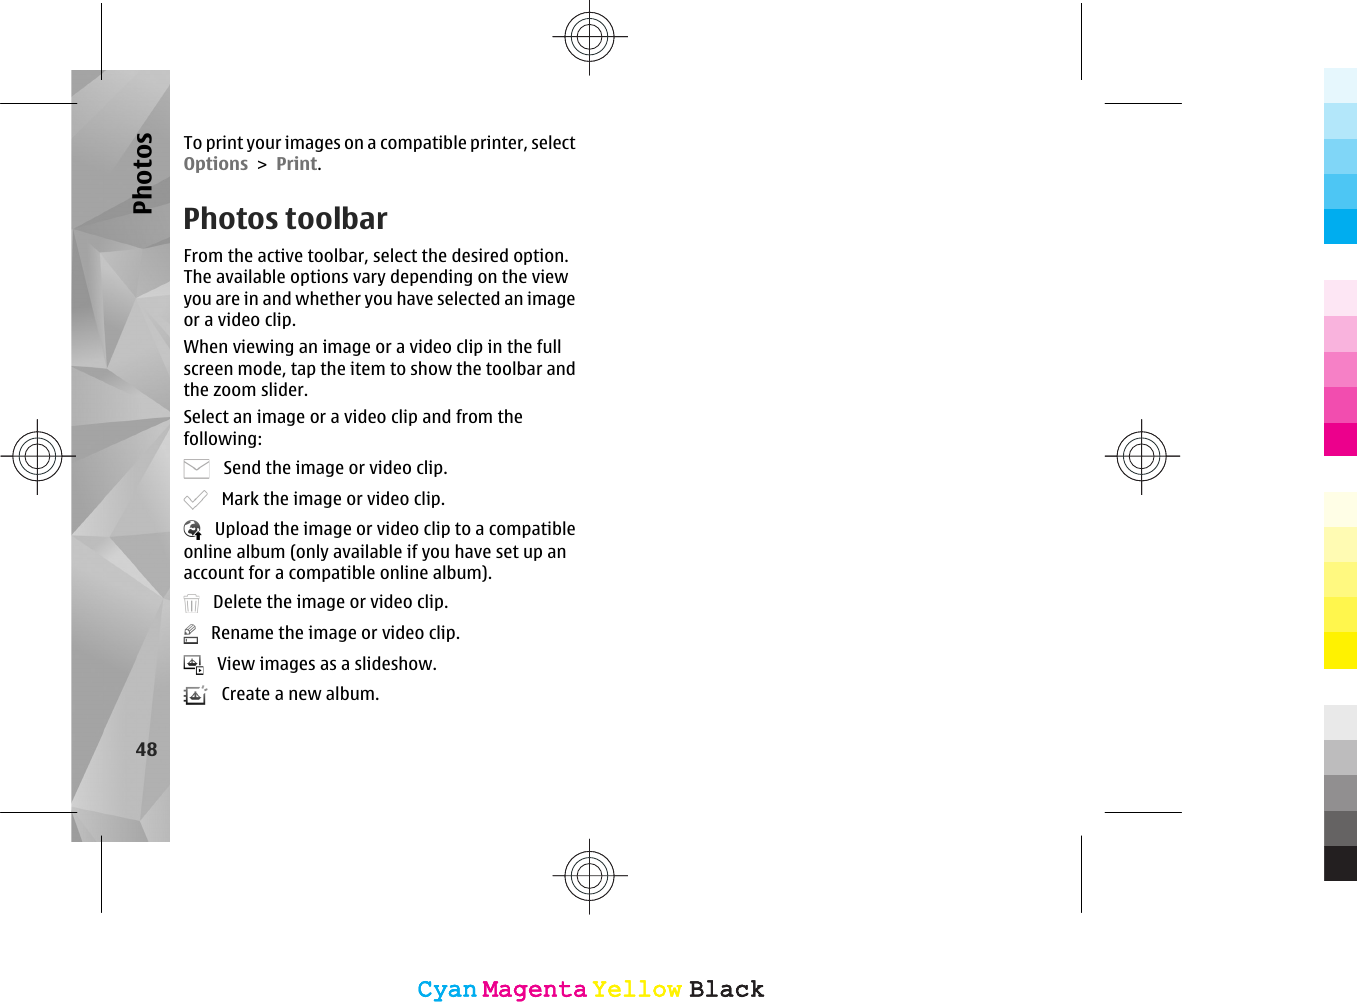 To print your images on a compatible printer, selectOptions &gt; Print.Photos toolbarFrom the active toolbar, select the desired option.The available options vary depending on the viewyou are in and whether you have selected an imageor a video clip.When viewing an image or a video clip in the fullscreen mode, tap the item to show the toolbar andthe zoom slider.Select an image or a video clip and from thefollowing:   Send the image or video clip.   Mark the image or video clip.   Upload the image or video clip to a compatibleonline album (only available if you have set up anaccount for a compatible online album).   Delete the image or video clip.   Rename the image or video clip.   View images as a slideshow.   Create a new album.48PhotosCyanCyanMagentaMagentaYellowYellowBlackBlackCyanCyanMagentaMagentaYellowYellowBlackBlack